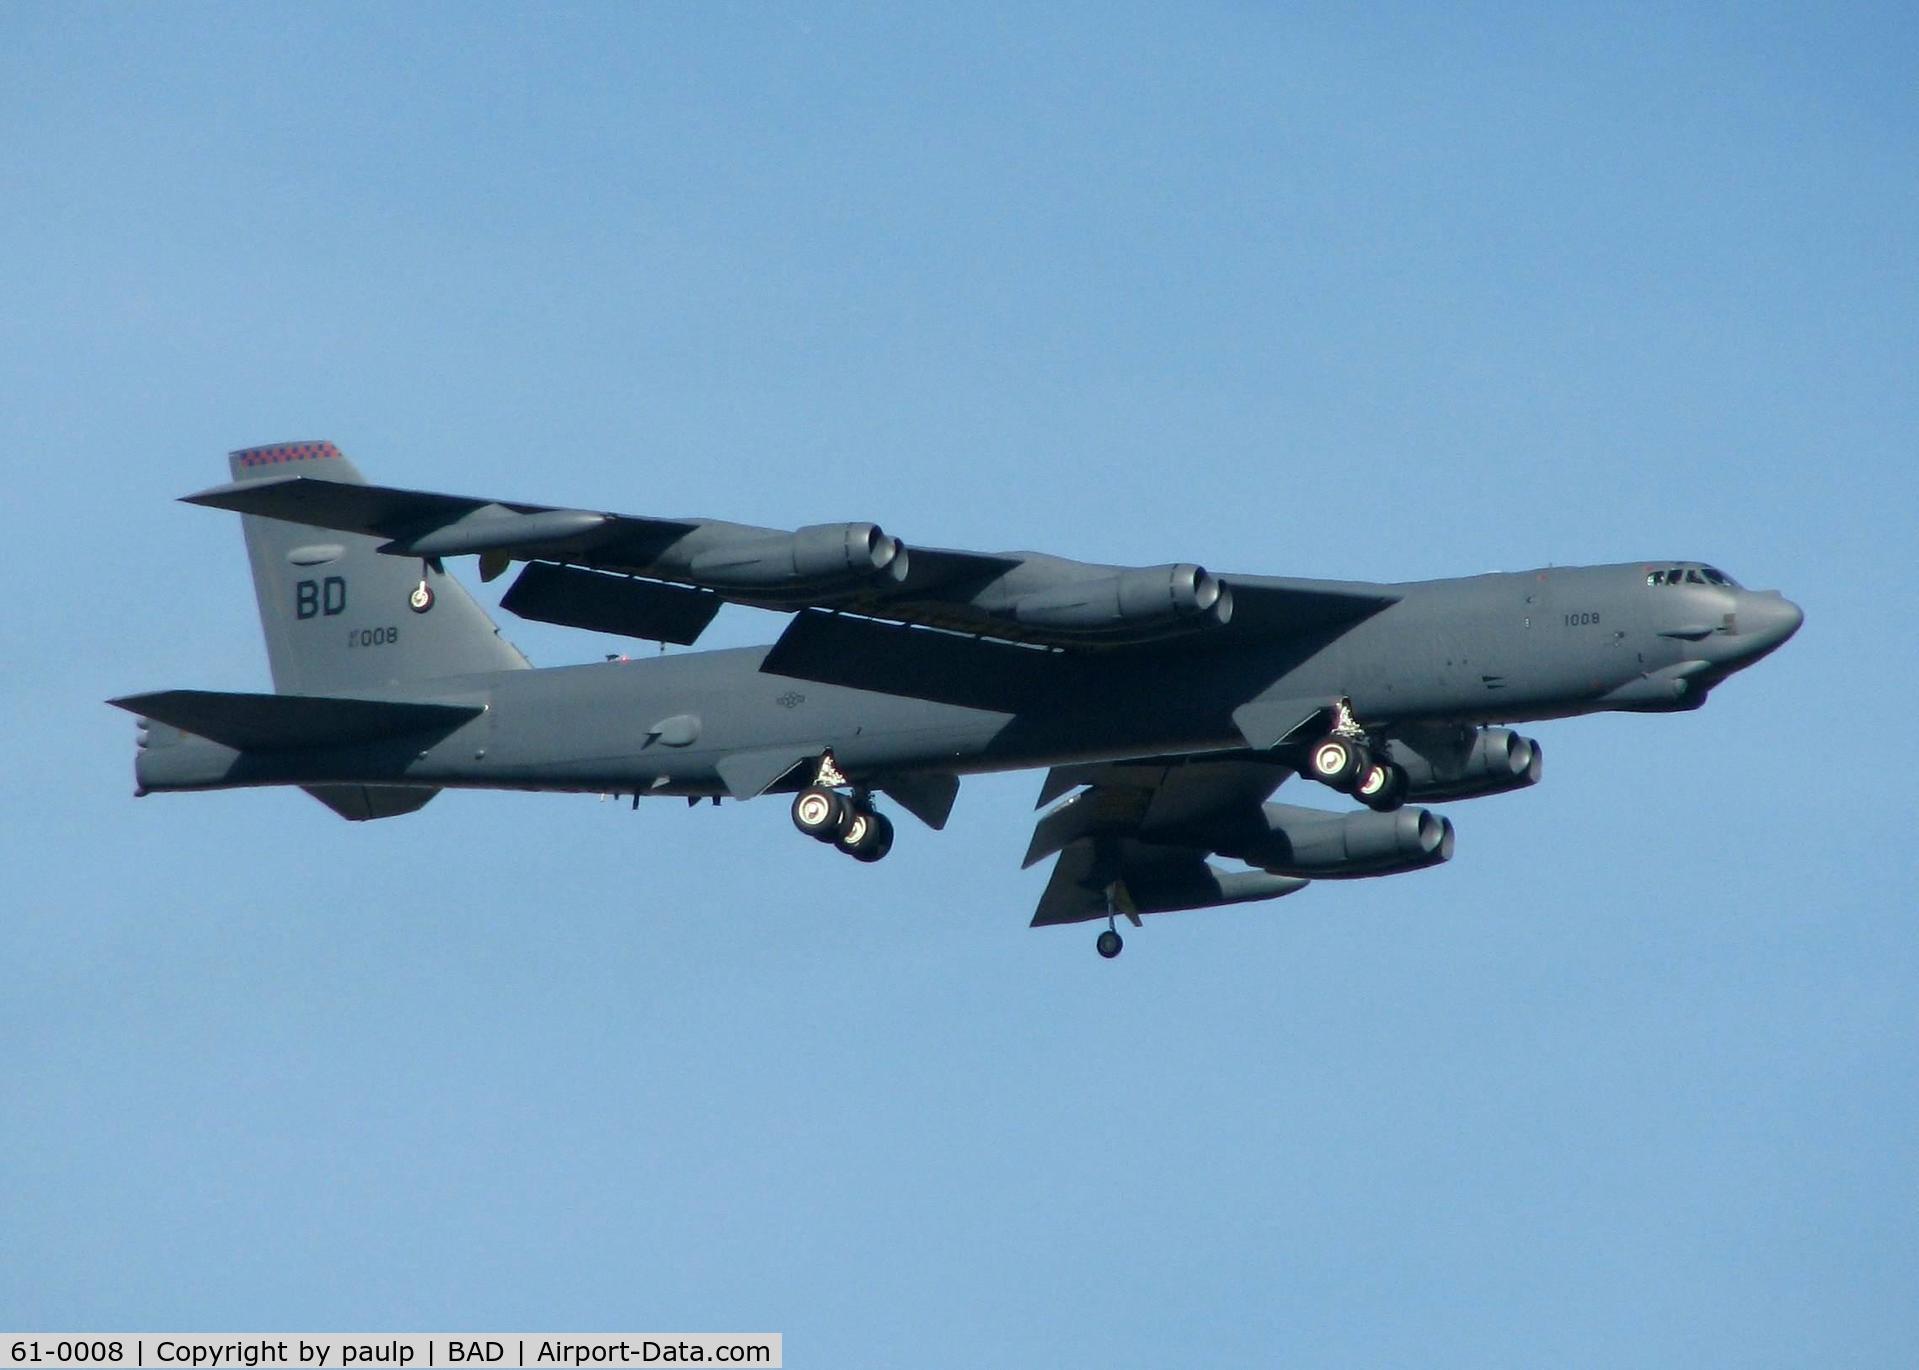 61-0008, 1961 Boeing B-52H Stratofortress C/N 464435, Final for Rwy 15 at Barksdale Air Force Base.